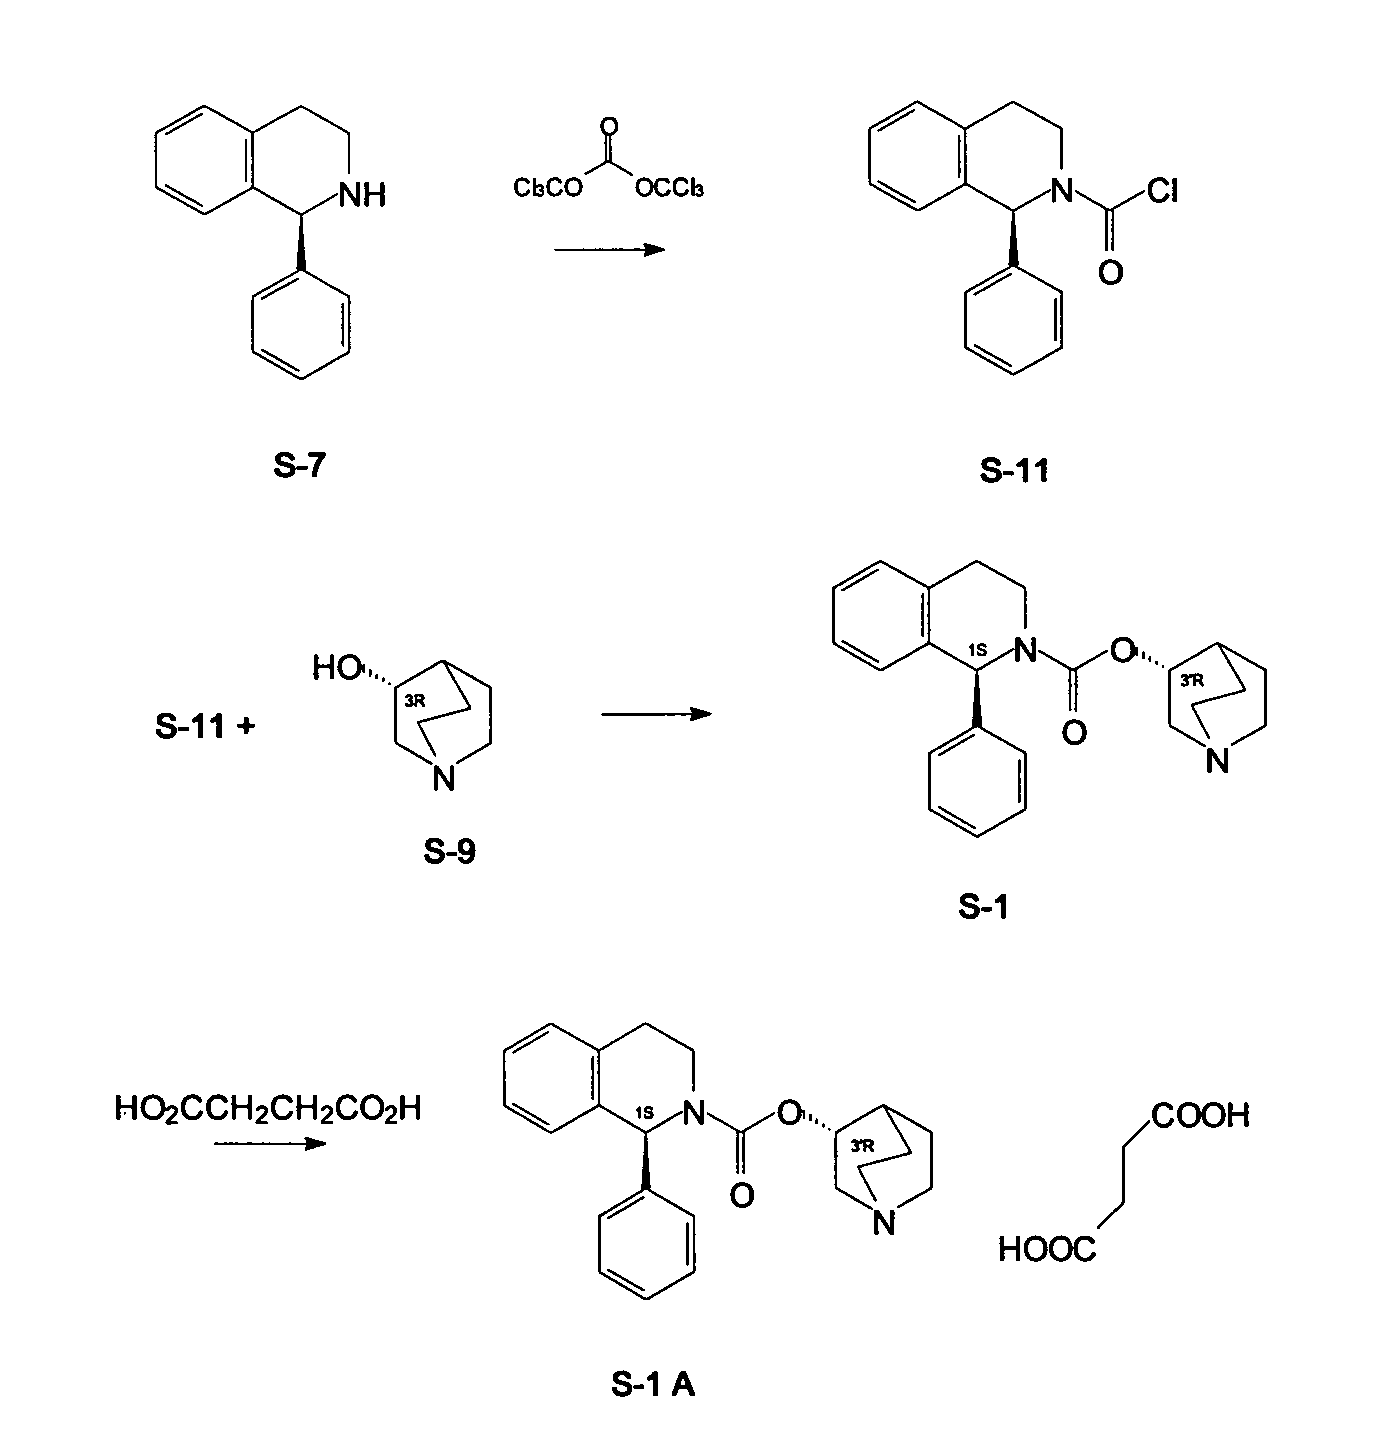 Process for Preparation Of Solifenacin and/or the Pharmaceutically Acceptable Salts Thereof of High Pharmaceutical Purity